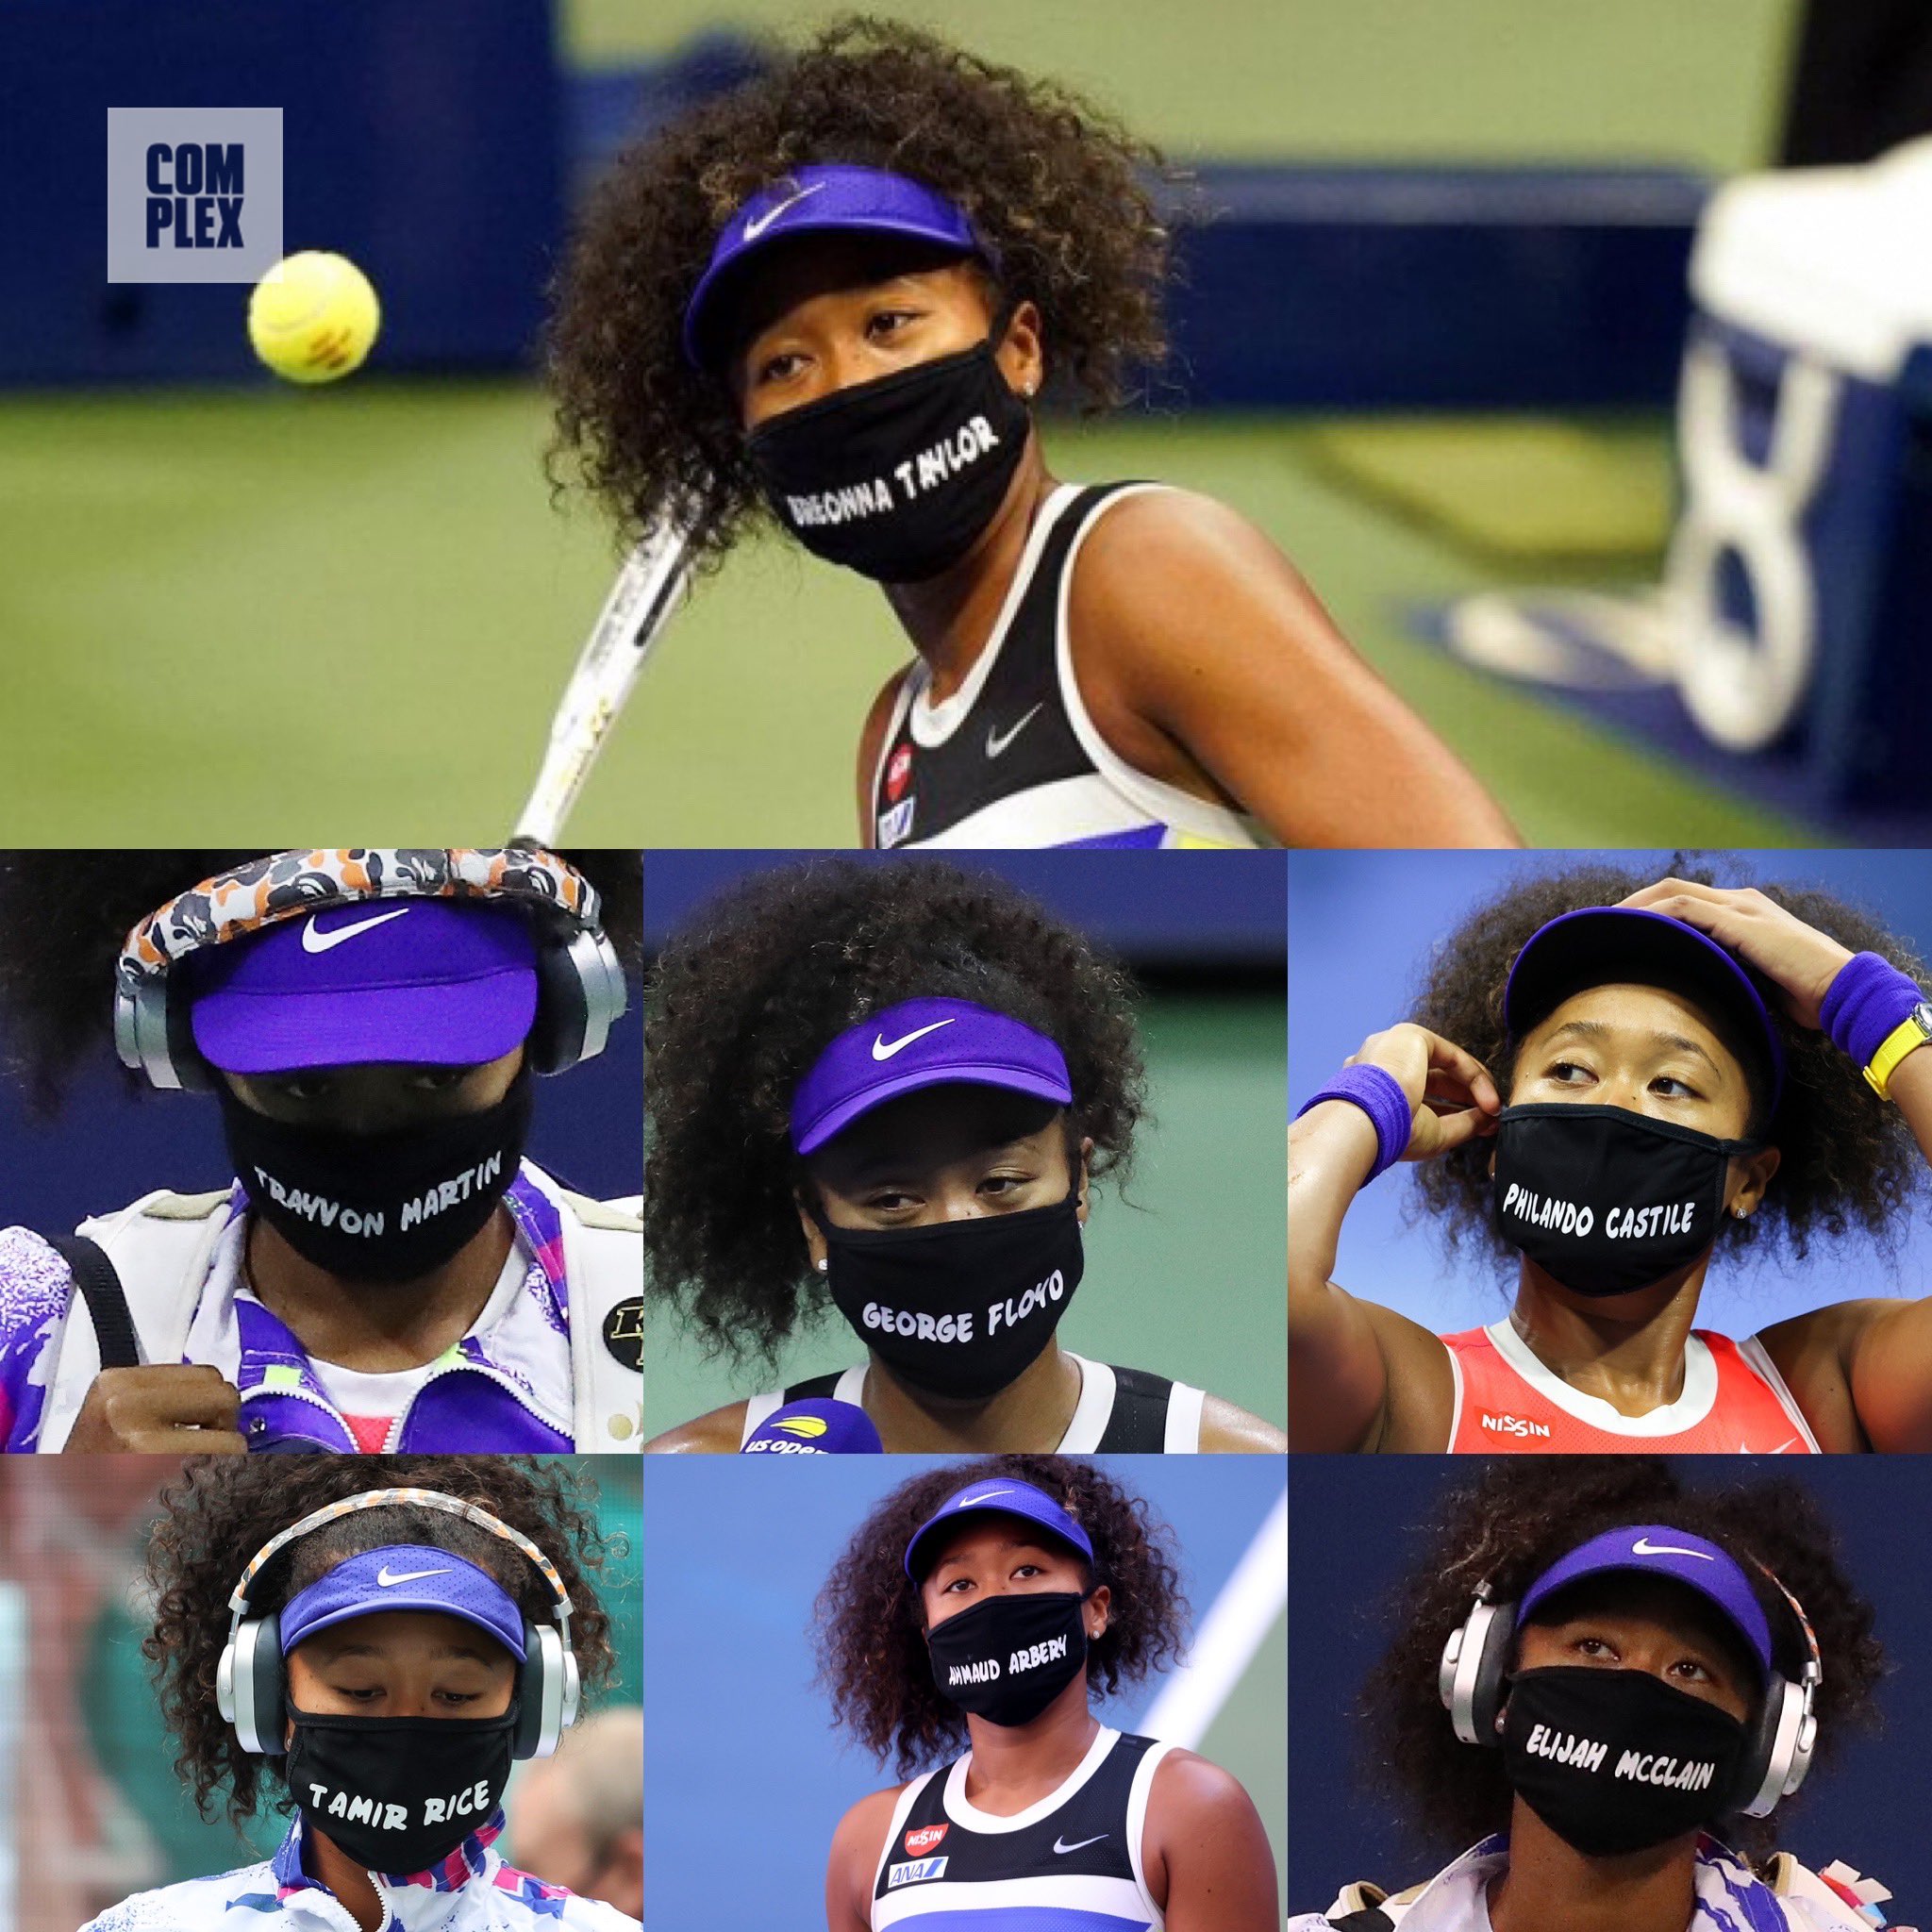 The seven face masks Naomi Osaka worn during her US Open.